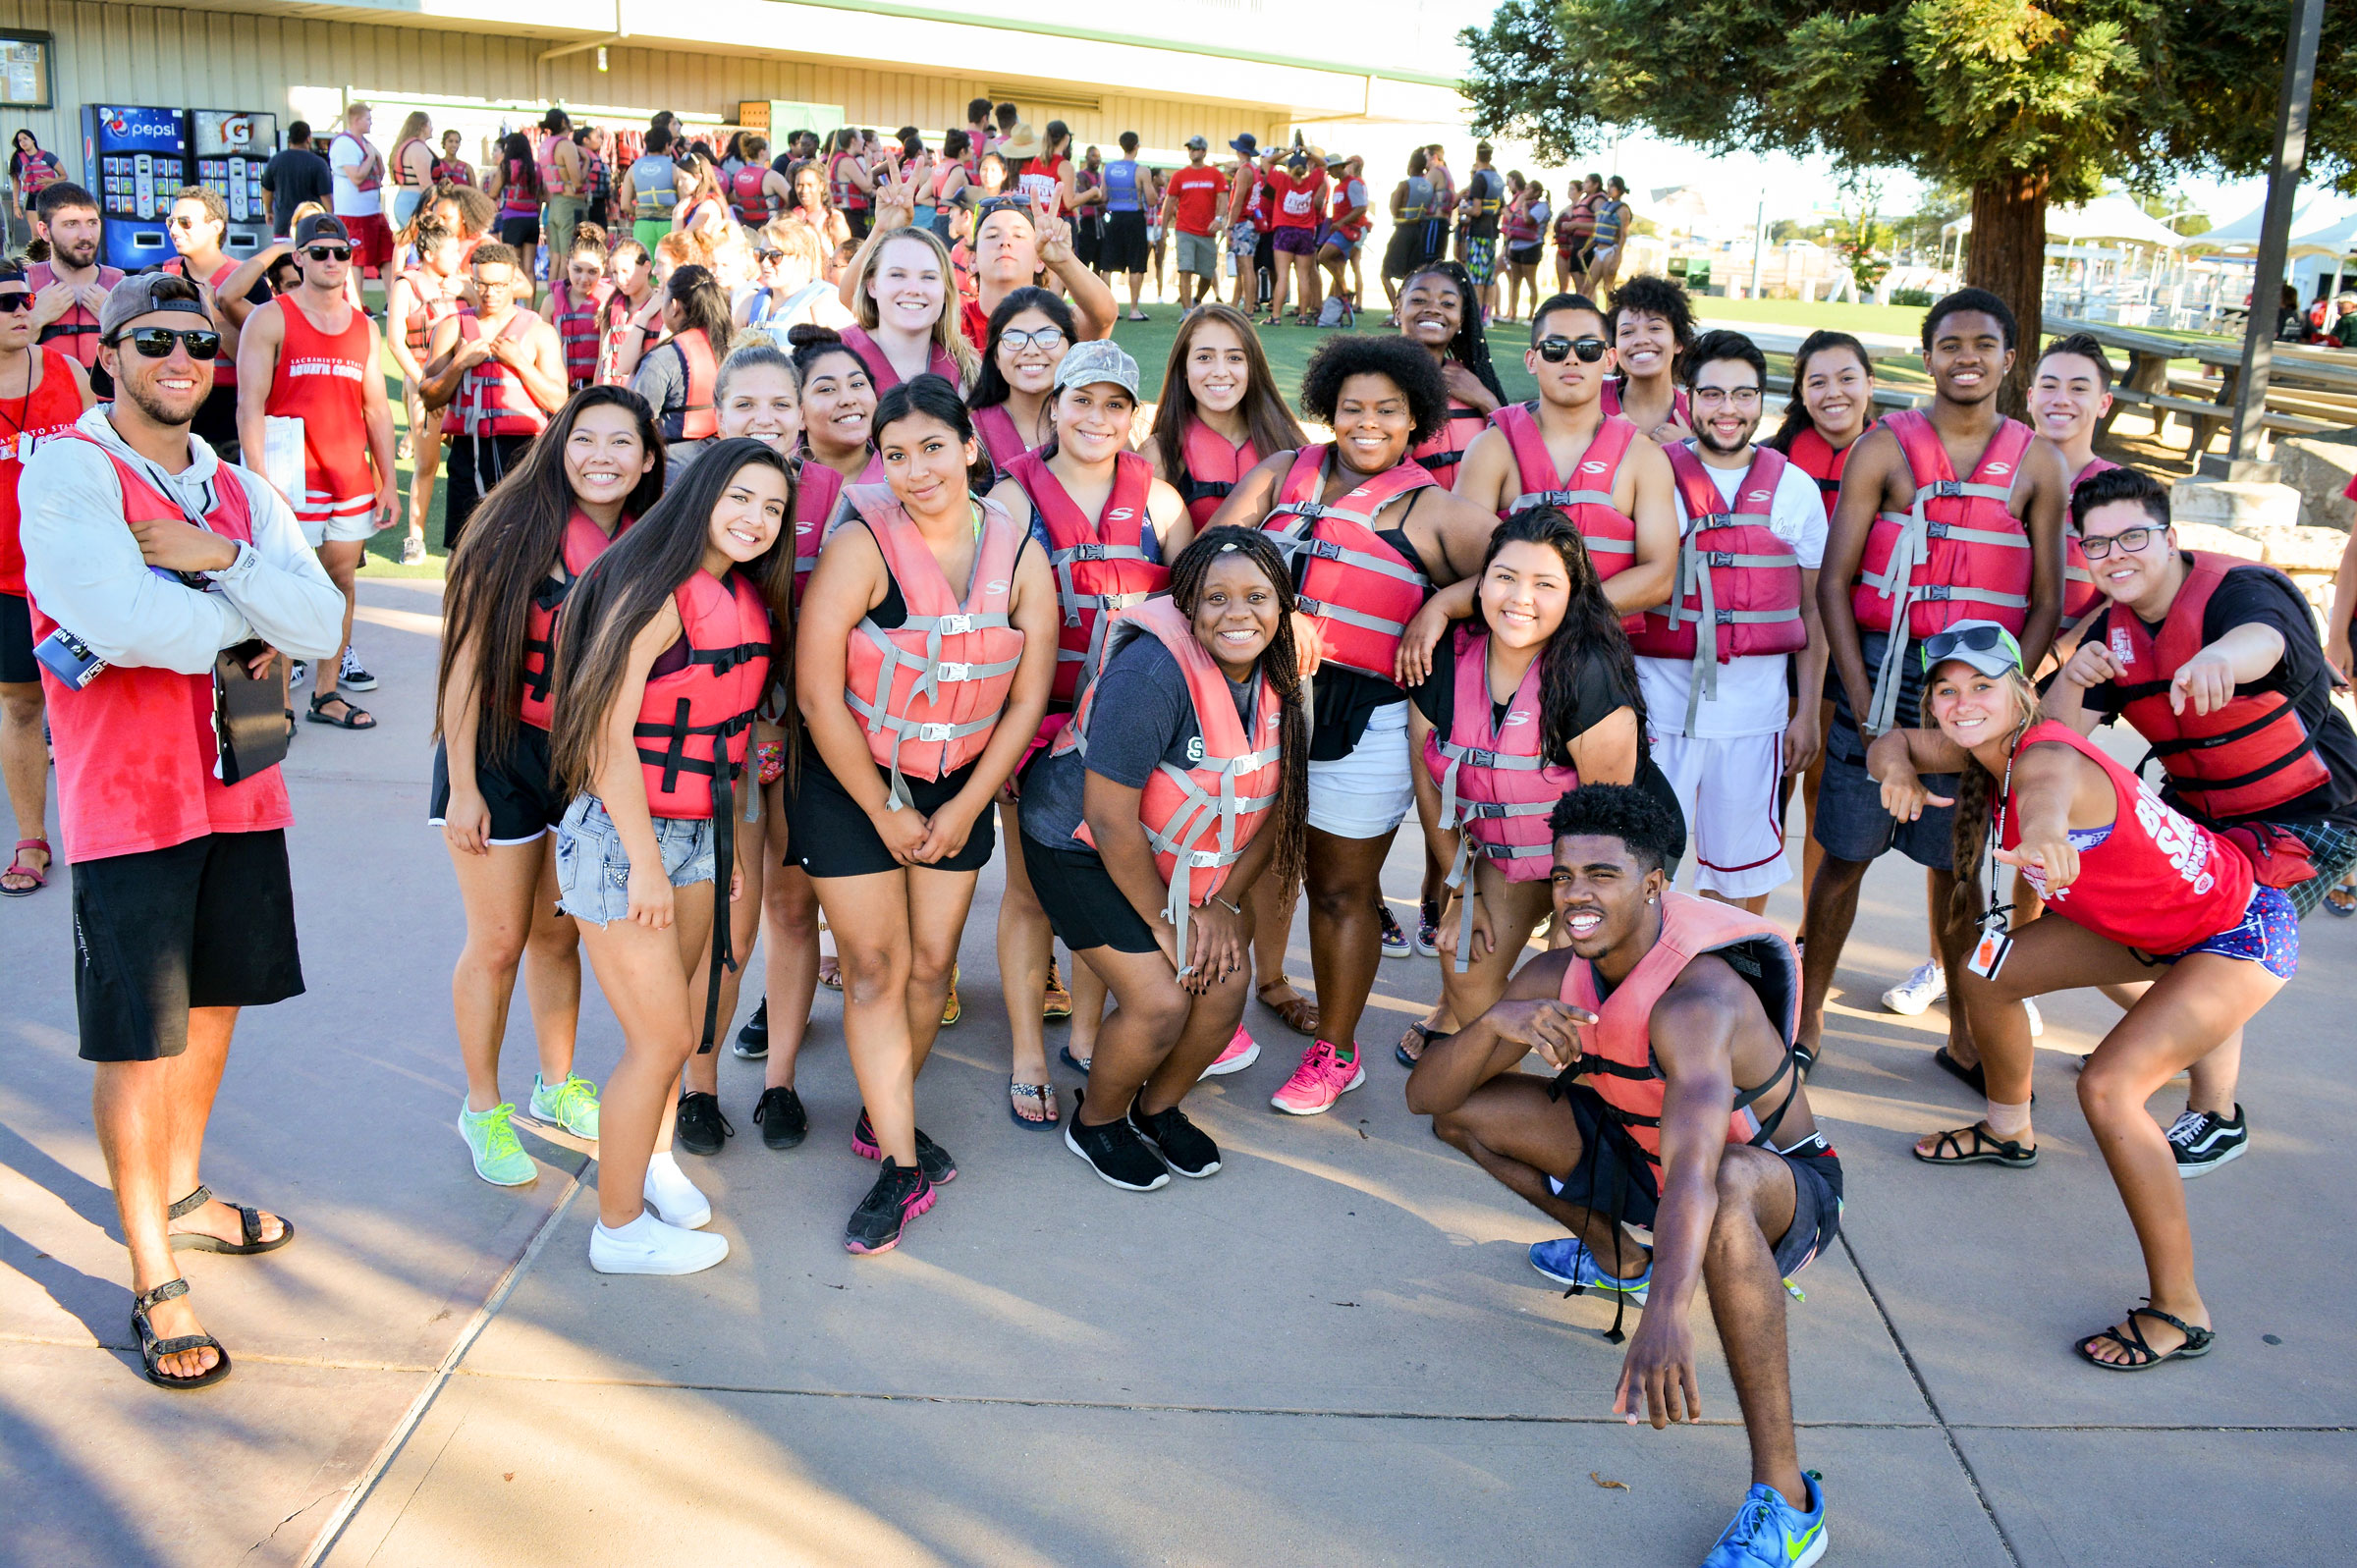 New students including Diana Contreras and DeAndre Wiltz post on the dock at the Sac State Aquatic Center in 2016